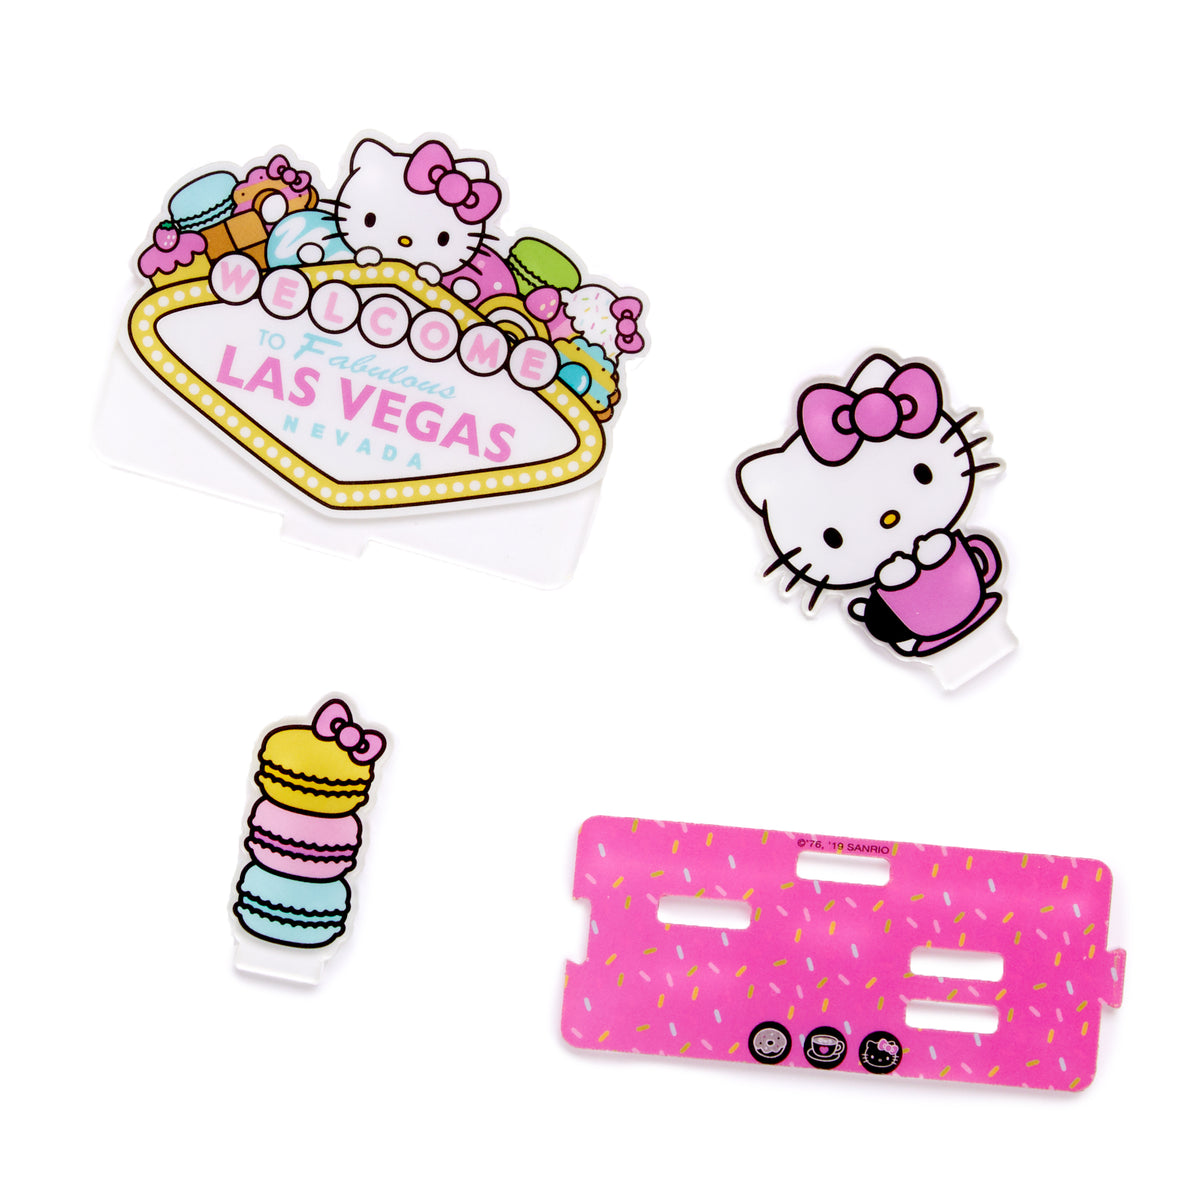 Hello Kitty Cafe Las Vegas - Take home a supercute scented squish